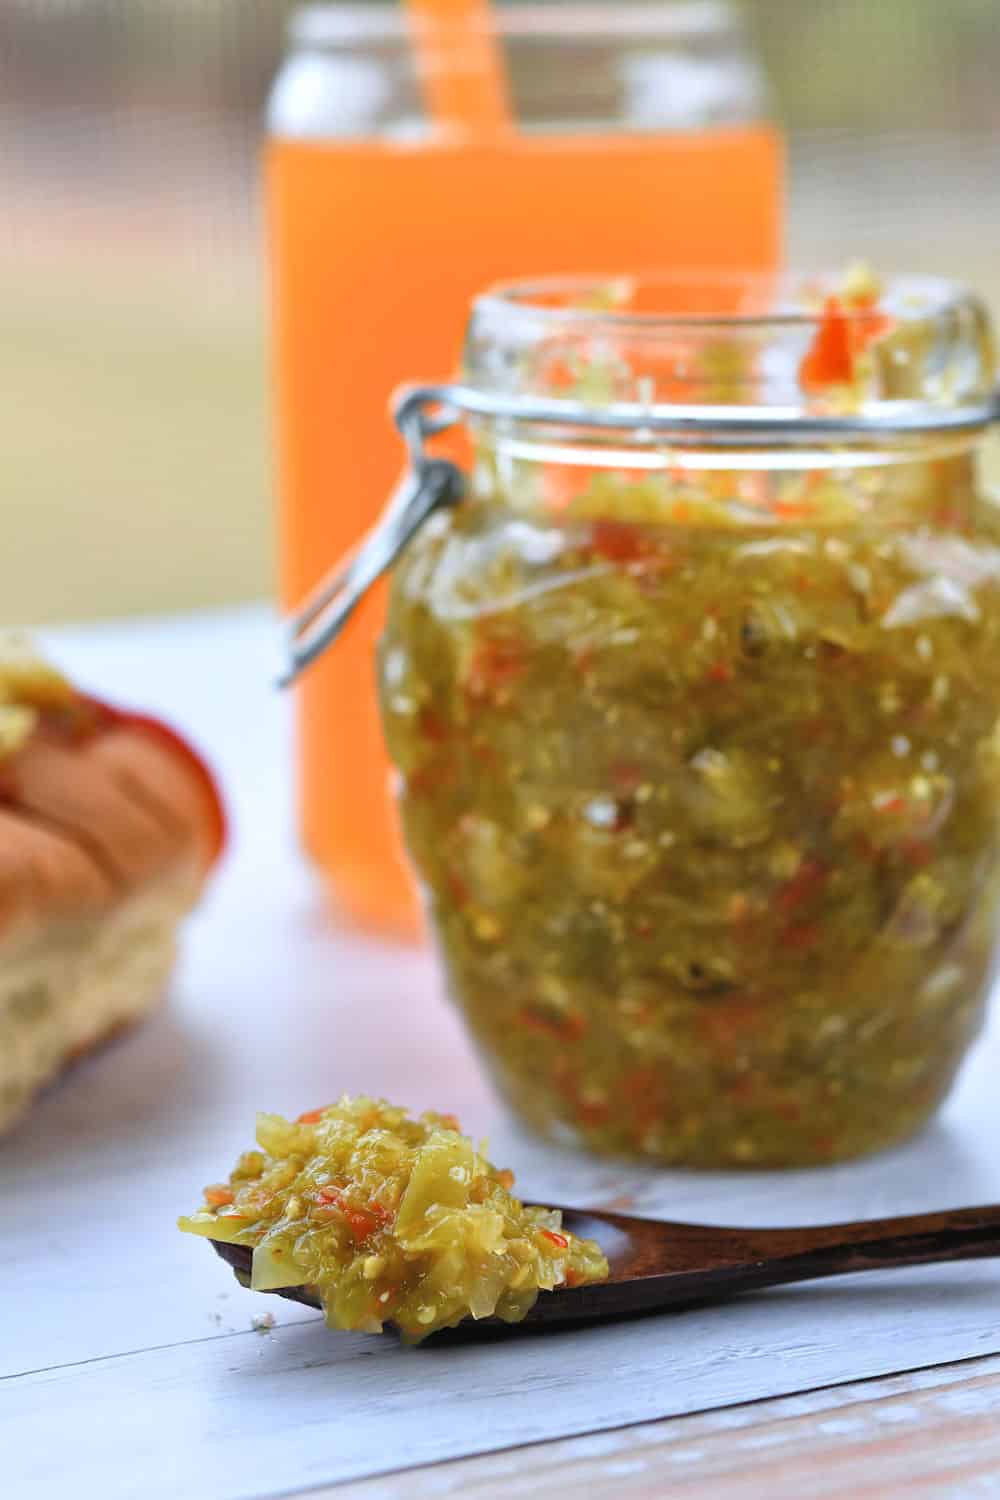 24Bite: Green Tomatoes Recipe for Hot Dog Relish by Christian Guzman